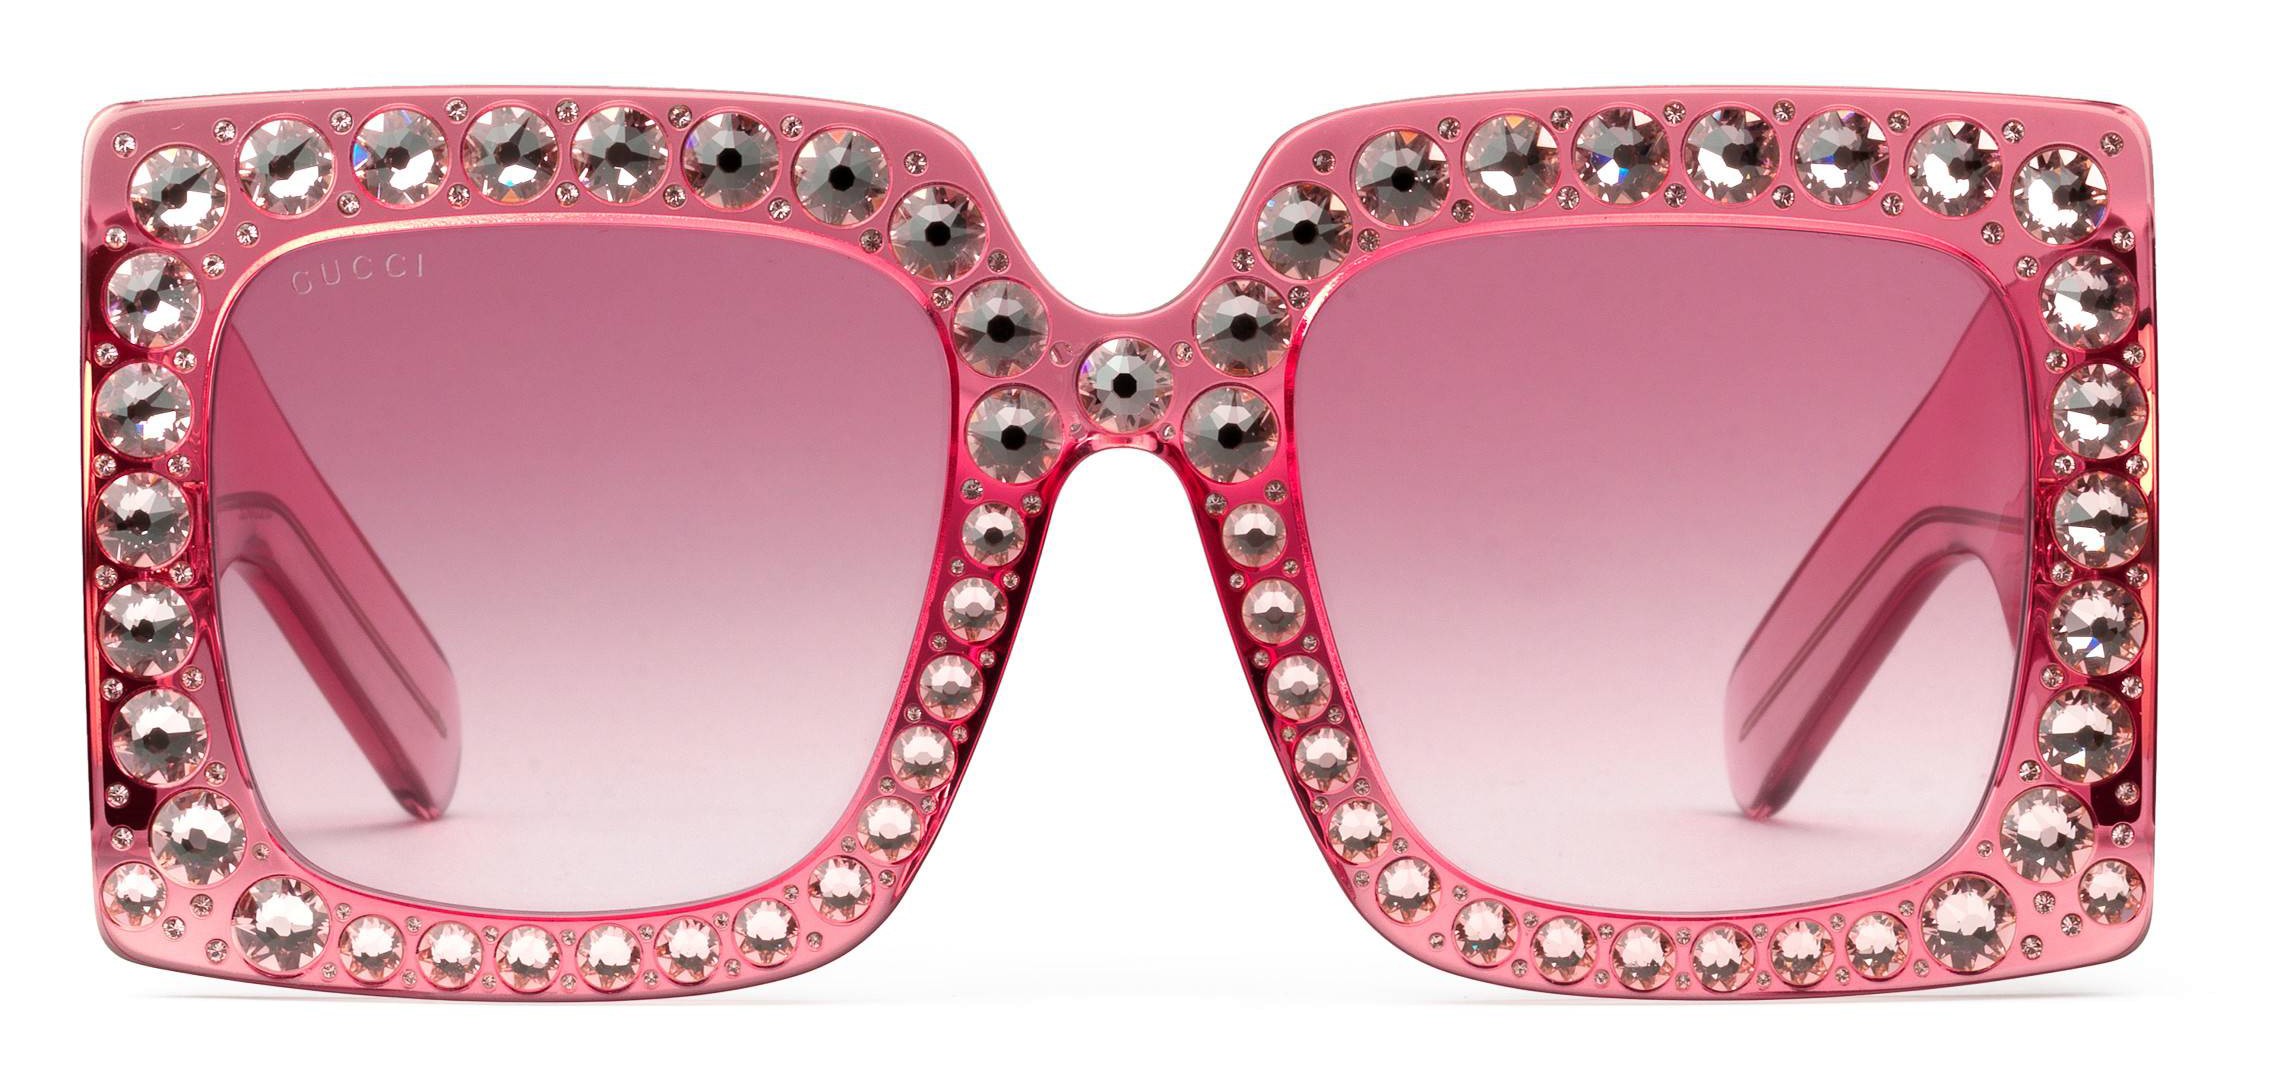 Gucci - Square Oversize Acetate Sunglasses - Pink with Crystals - Gucci  Eyewear - Avvenice